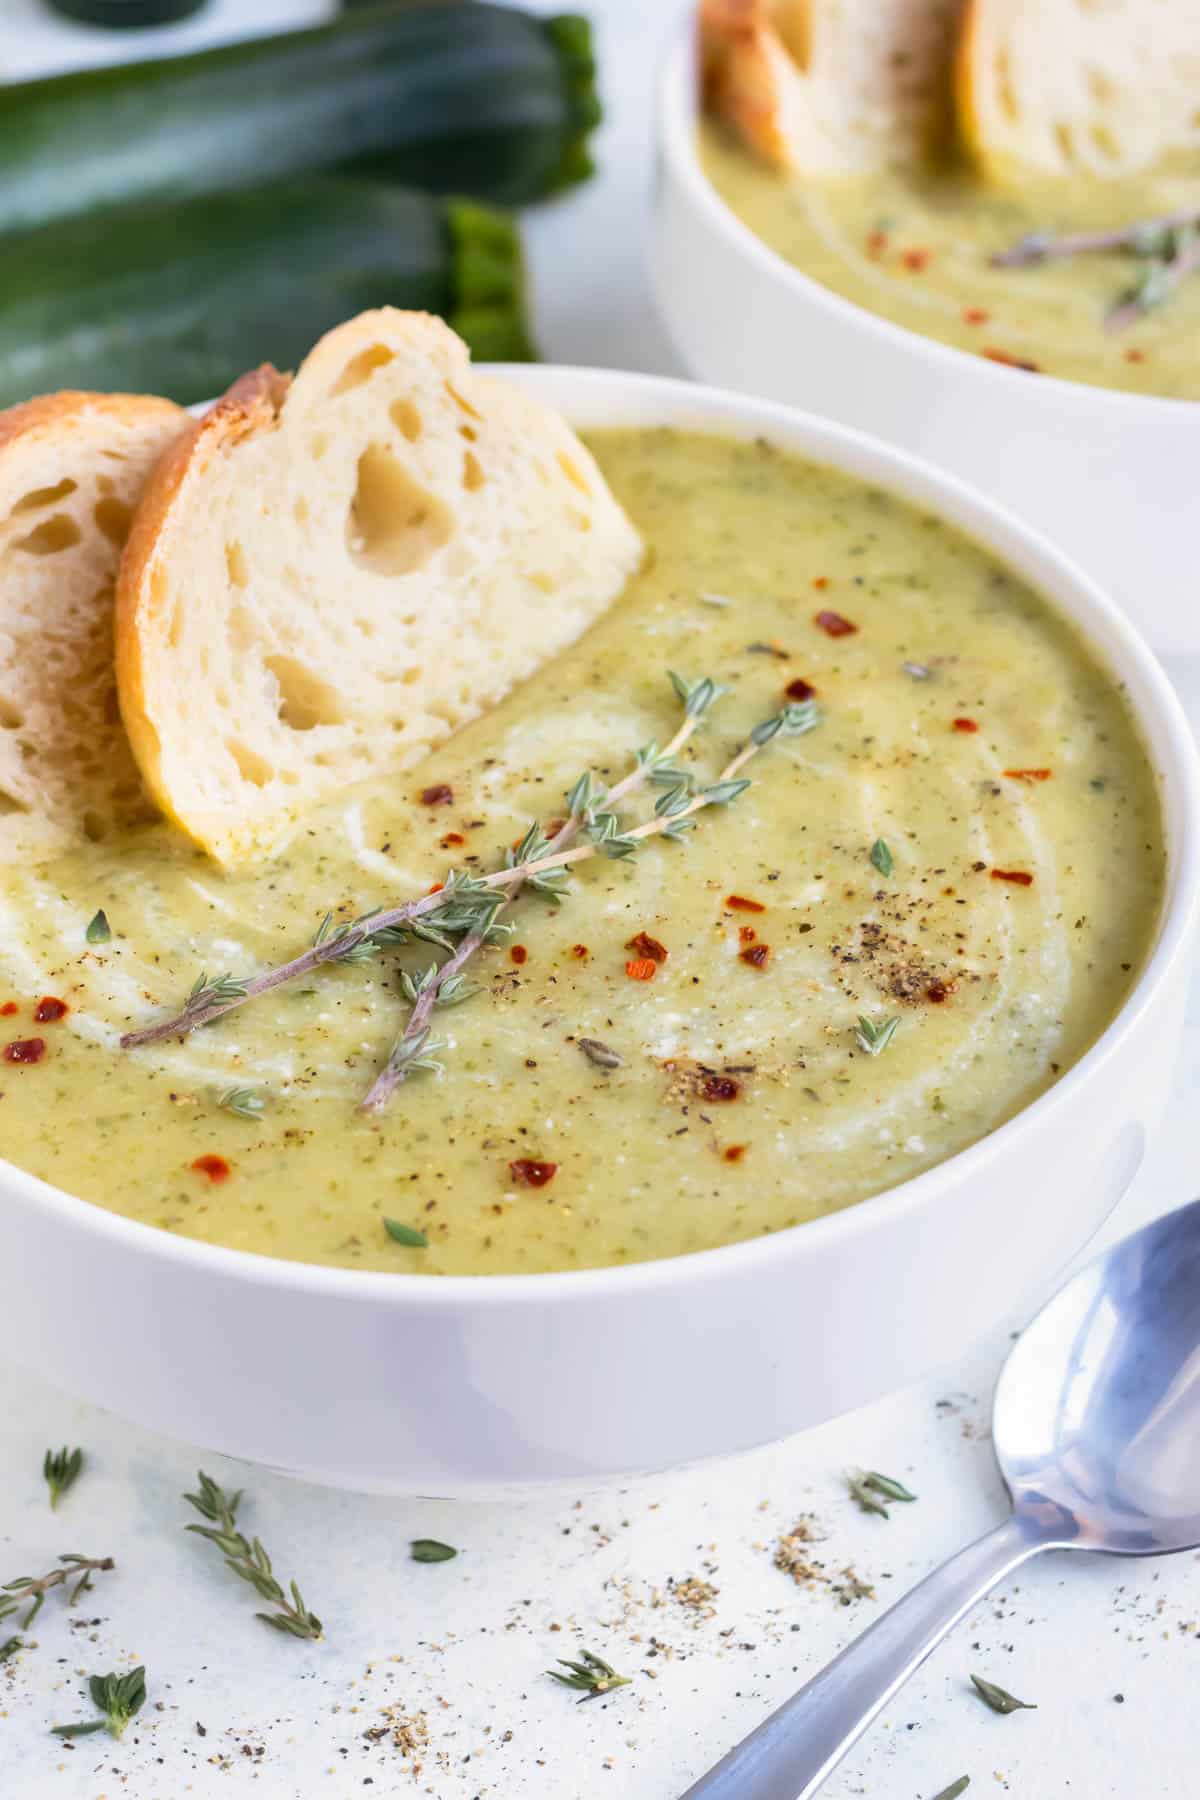 Zucchini soup with fresh herbs and bread.